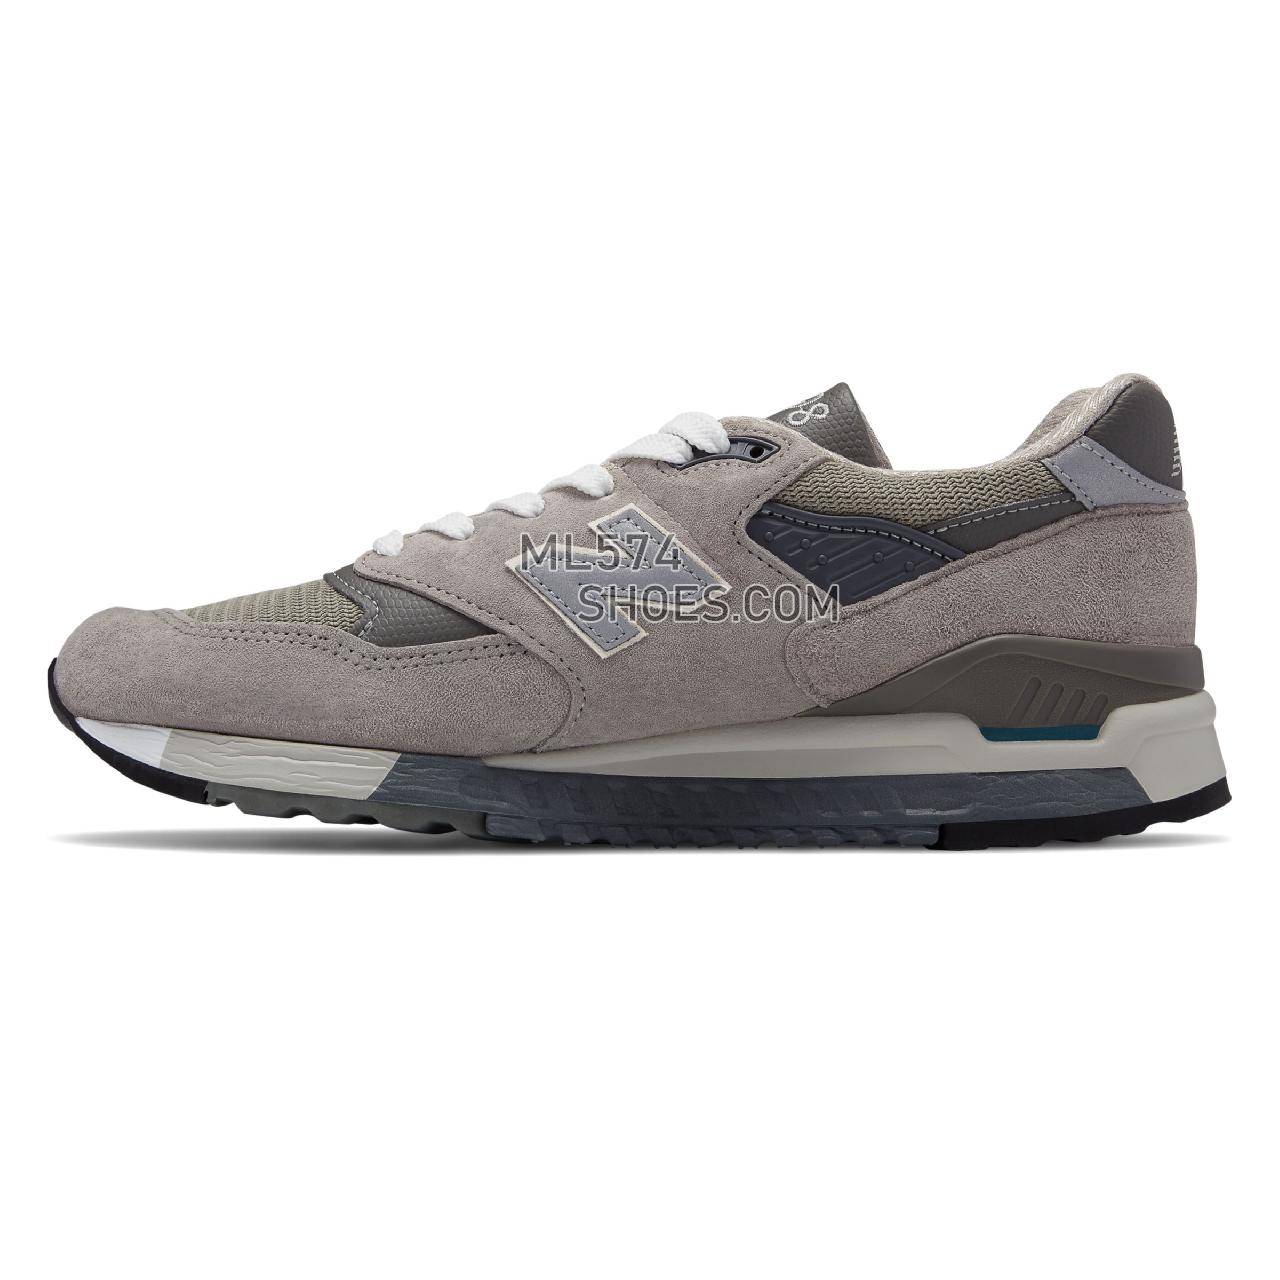 New Balance 998 Made in the USA Bringback - Men's 998 - Classic Light Grey with Grey - M998